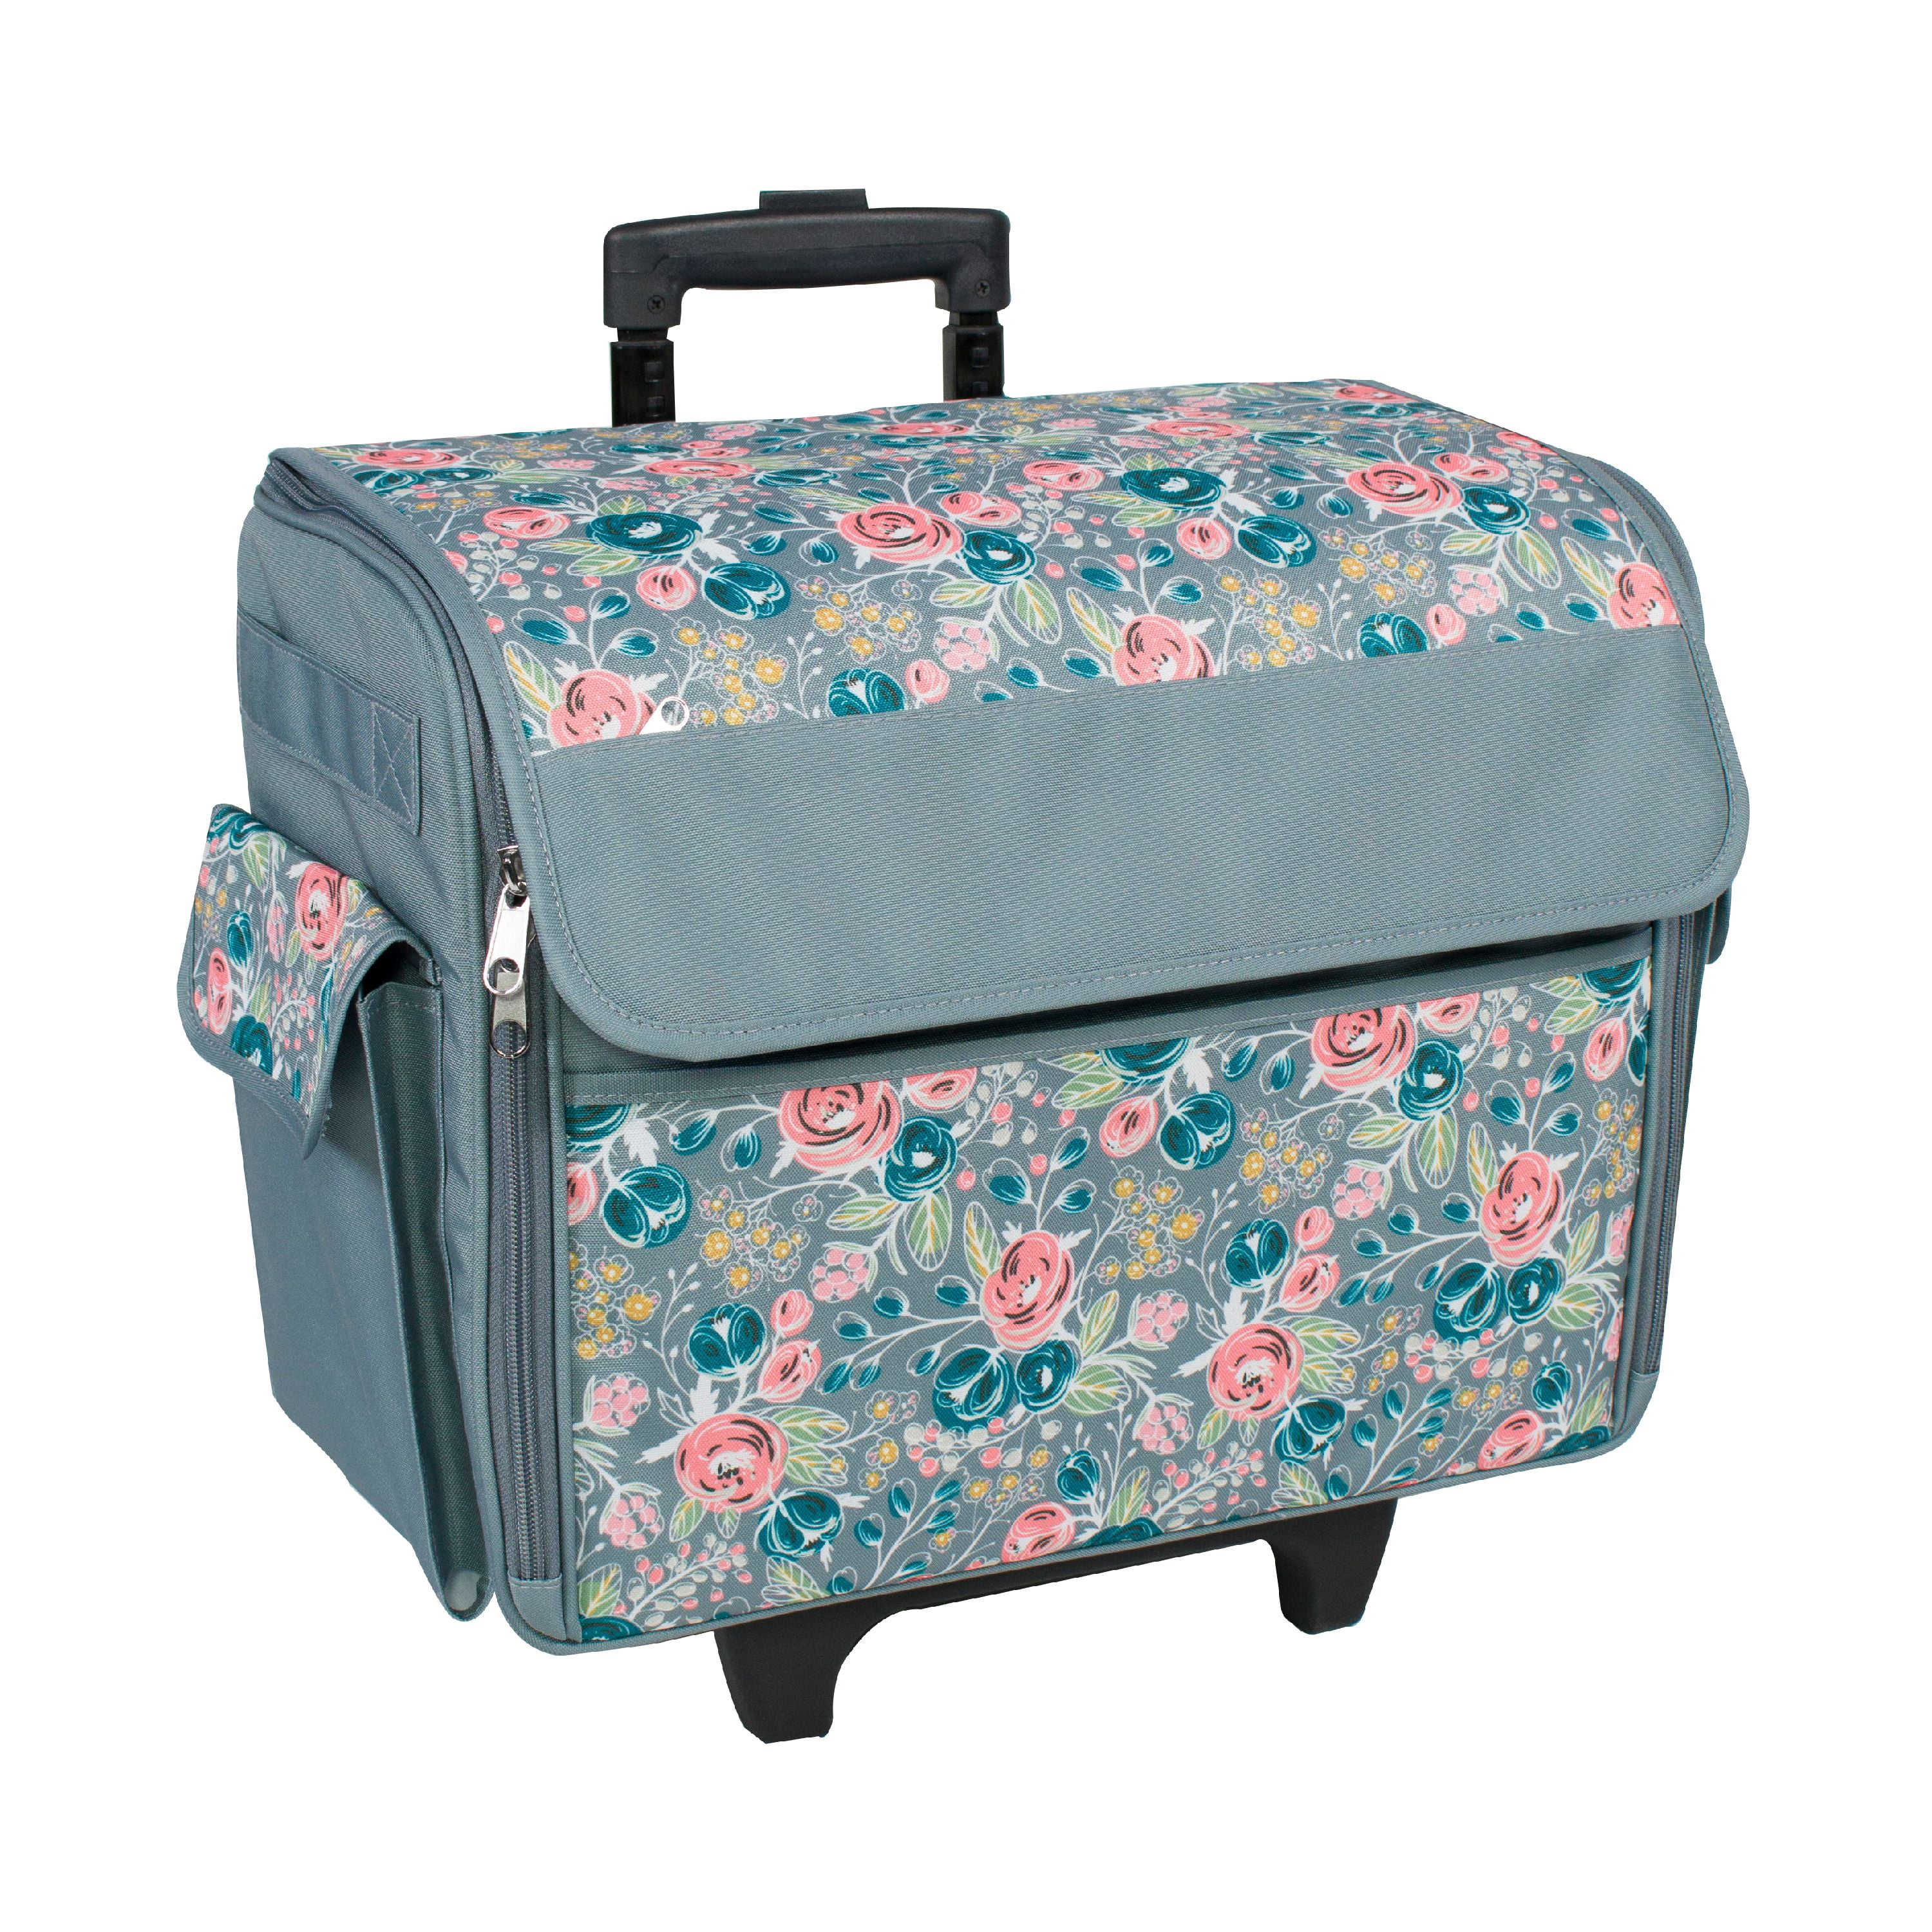 Everything Mary 17 Gray Quilted Sewing Machine Carrying Case